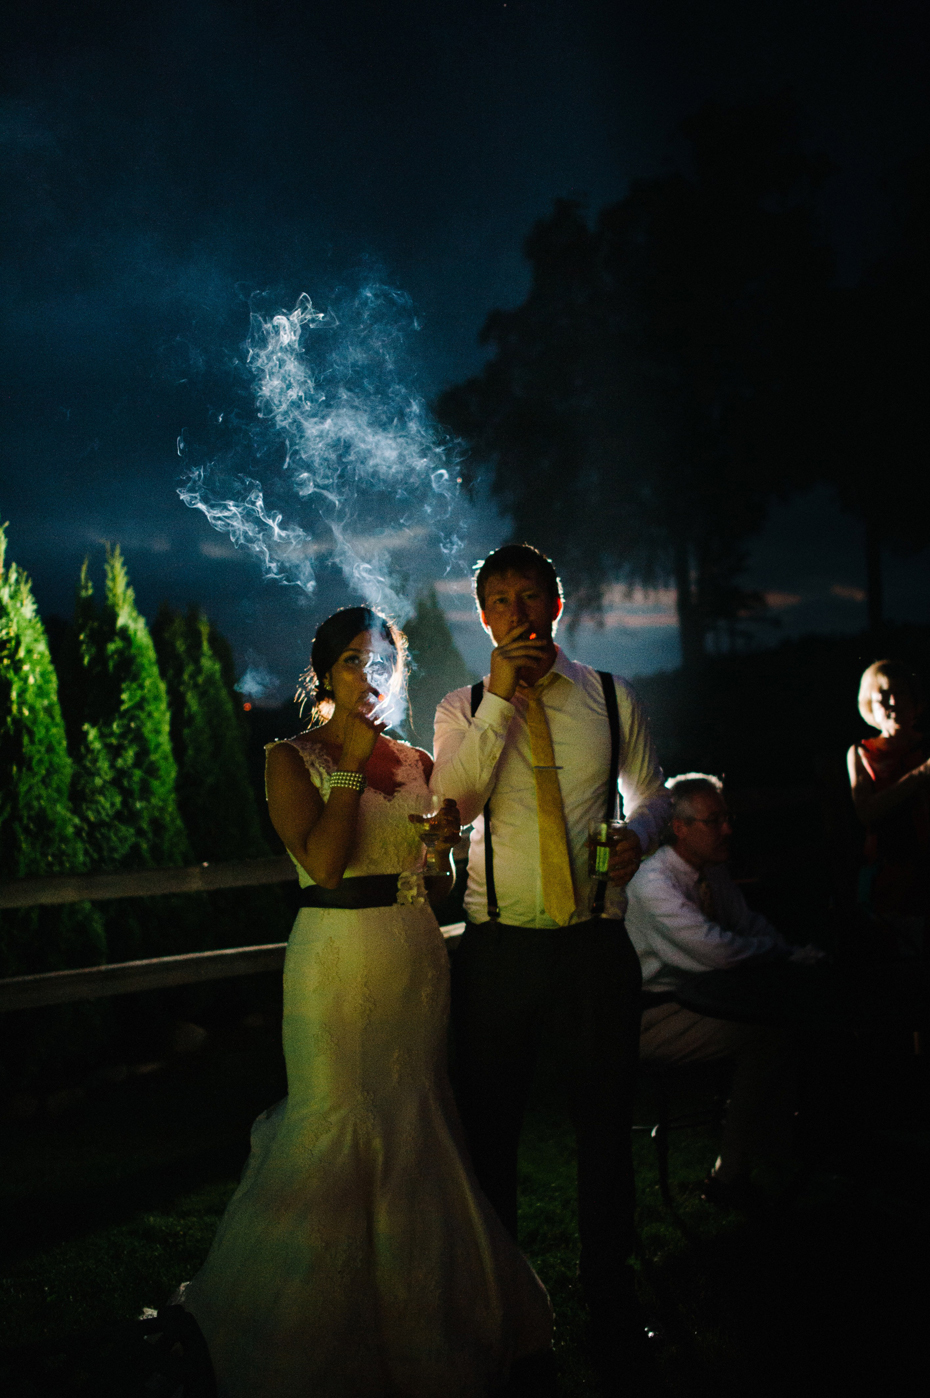 Bride and groom share a celebratory cigar during an outdoor wedding reception at The Inn at Stonecliffe on Mackinac Island by Ann Arbor Wedding Photographer Heather Jowett.